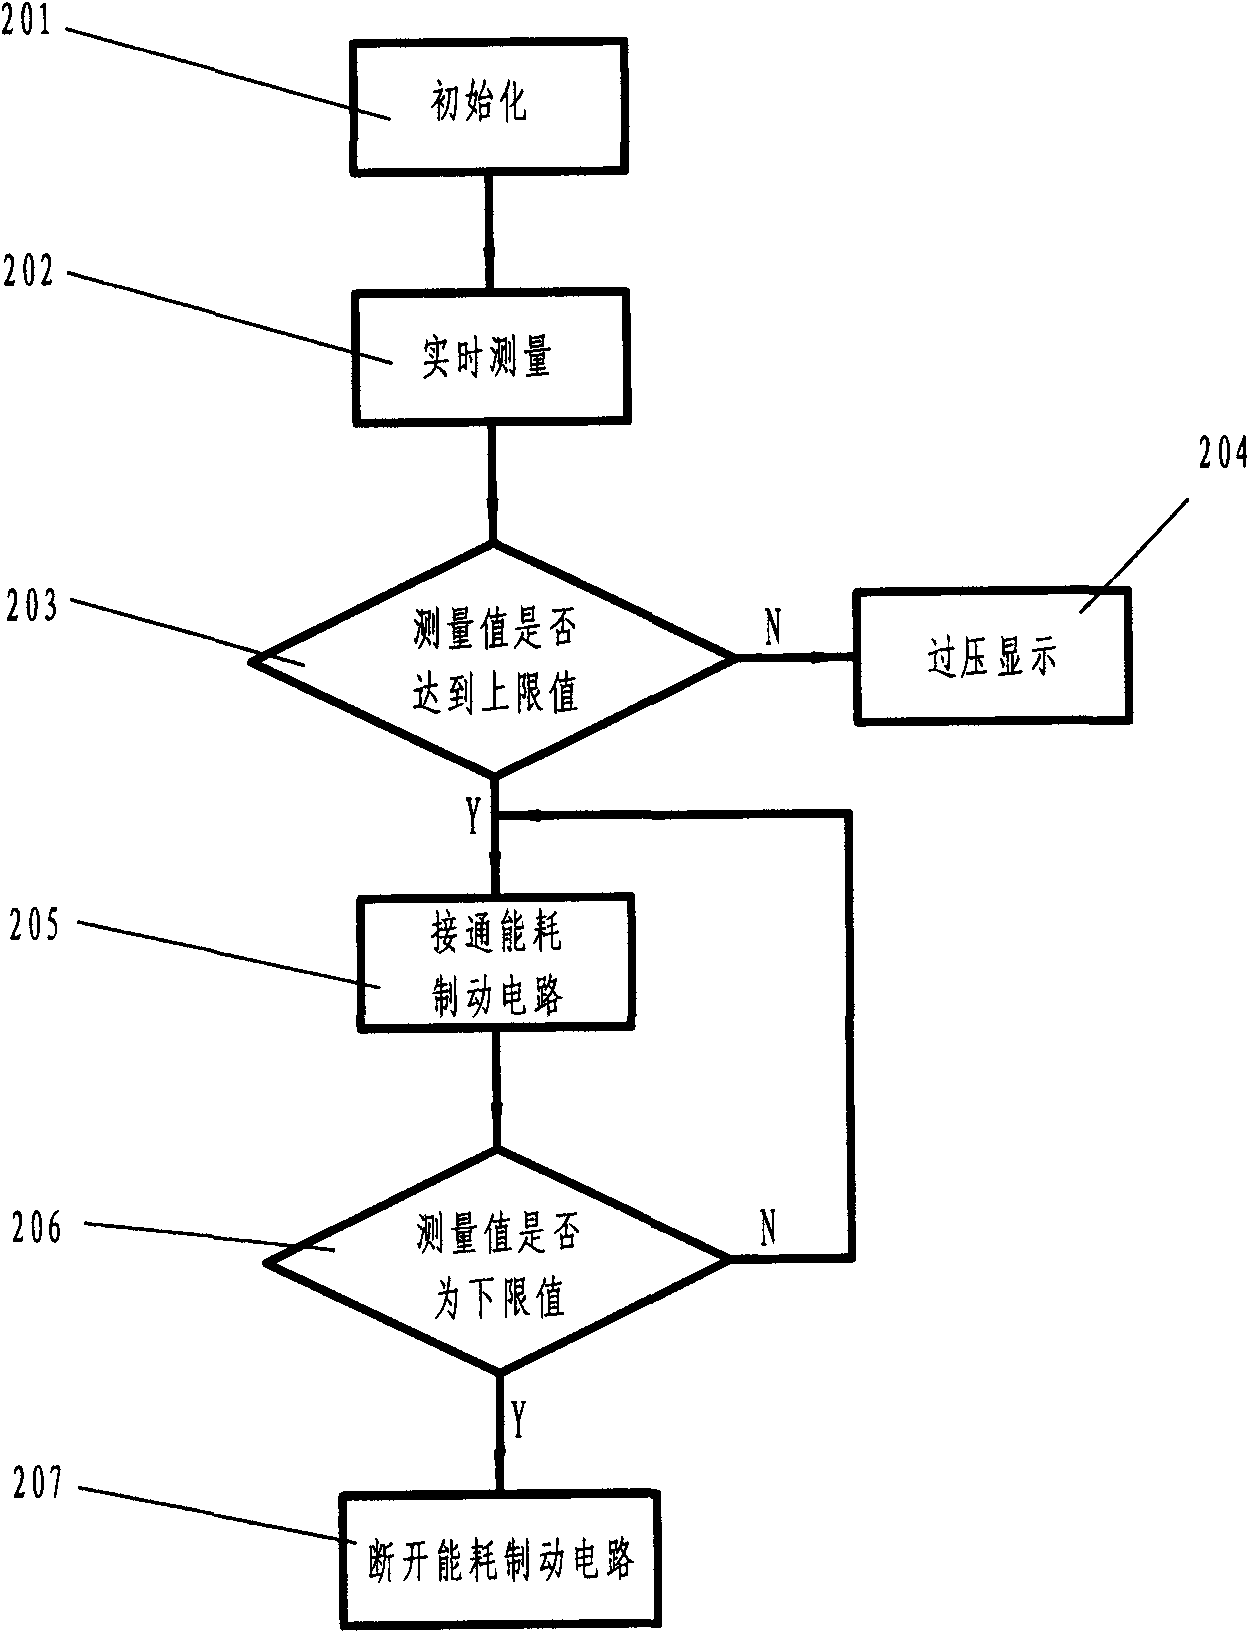 Power unit with brake function for unit cascaded high-voltage frequency converter